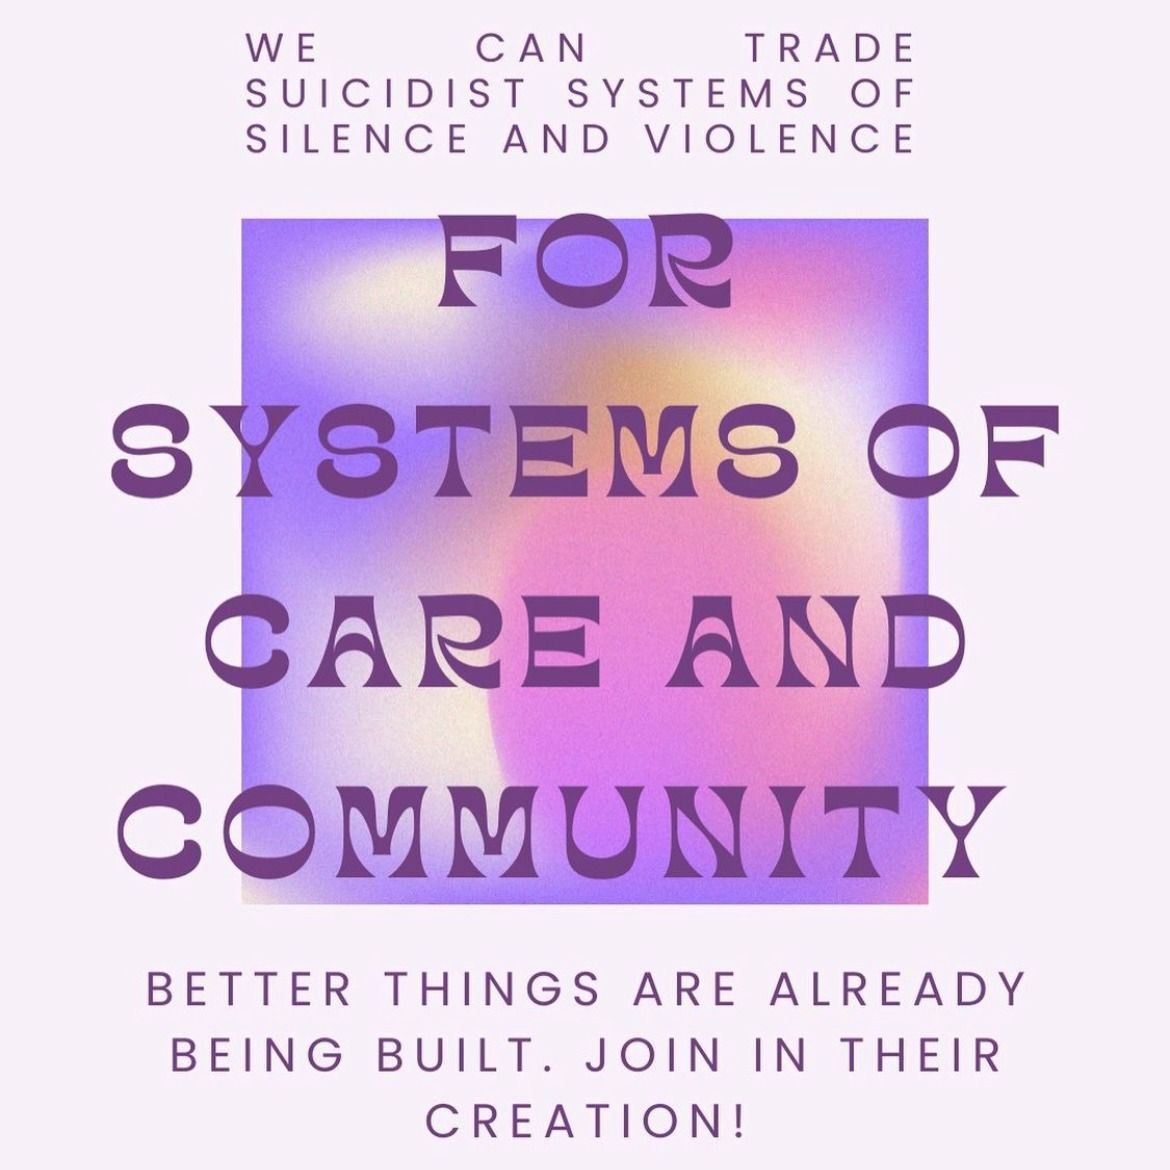 We can trade suicidist systems of silence & violence for care. Better things are already being built. Join in their creation!